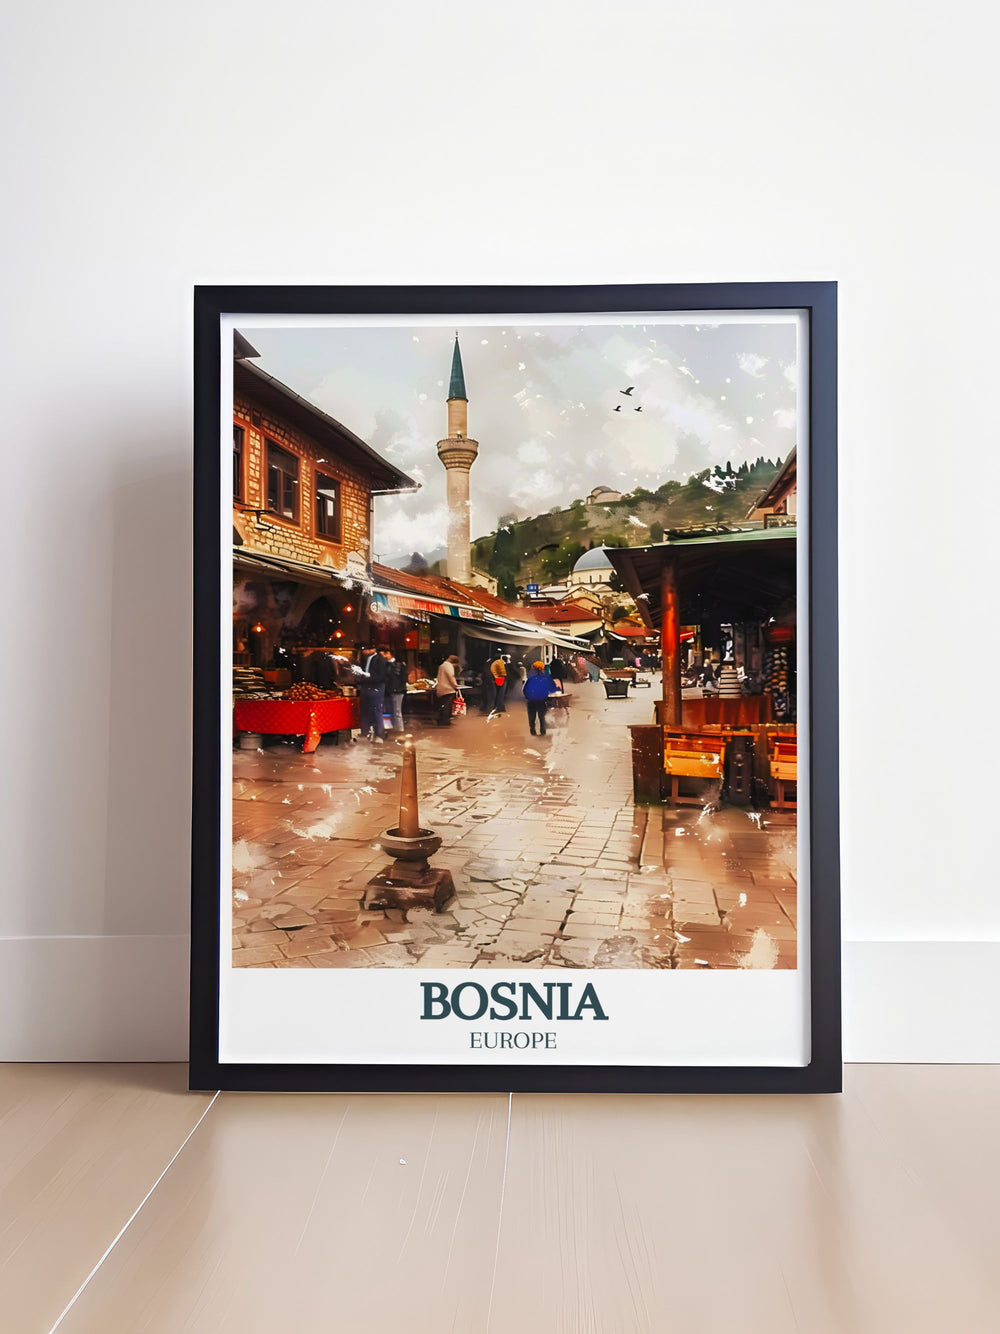 Experience the beauty of Bascarsija, the Old Bazaar, Gazi Husrev beg Mosque with this captivating Bosnia art print. Ideal for travel enthusiasts this Bosnia painting brings the essence of Sarajevos historic charm into your living space.